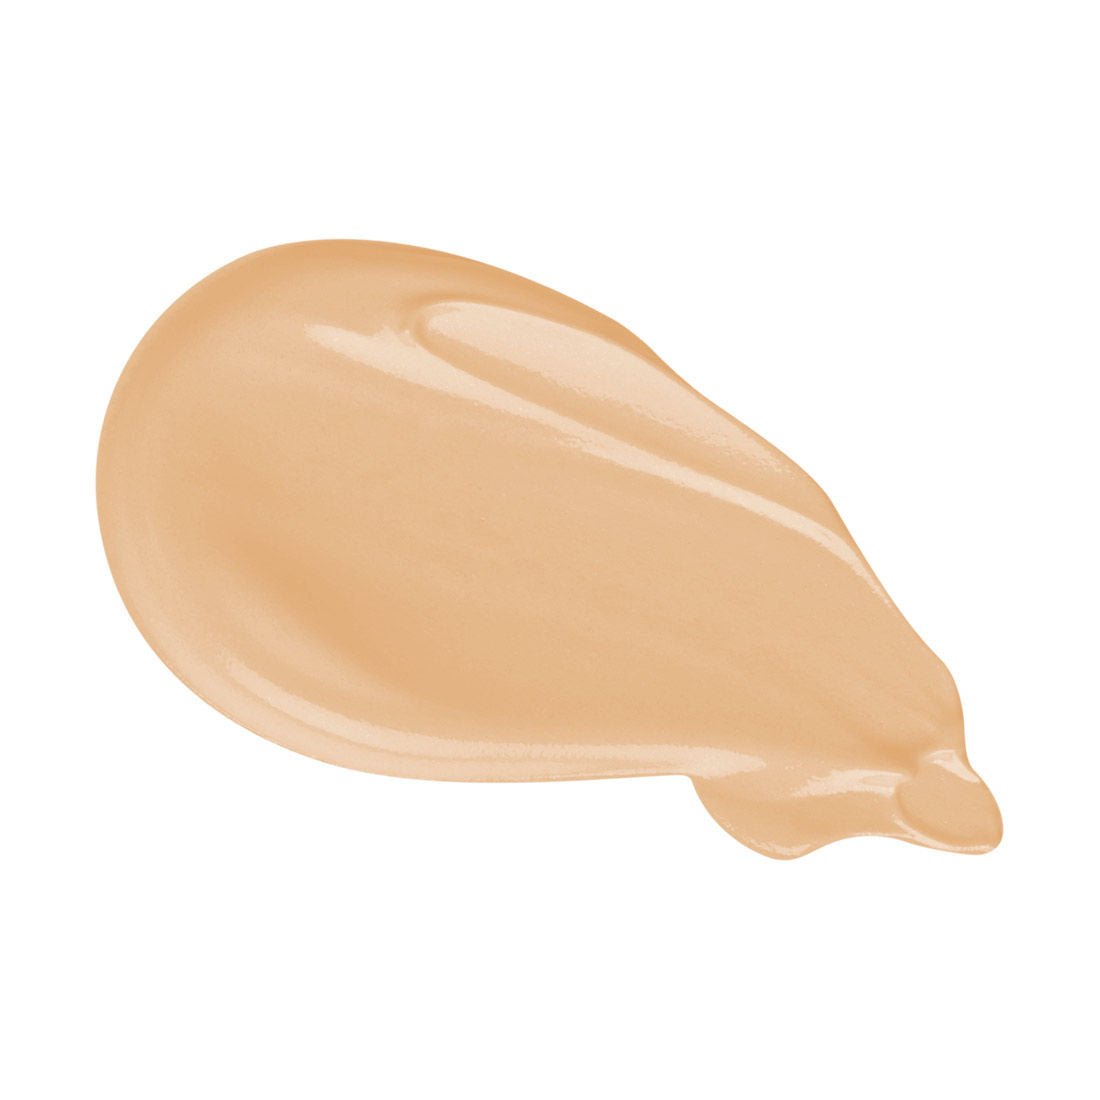 Too Faced Born This Way Flawless Coverage Natural Finish Foundation - 30 mL